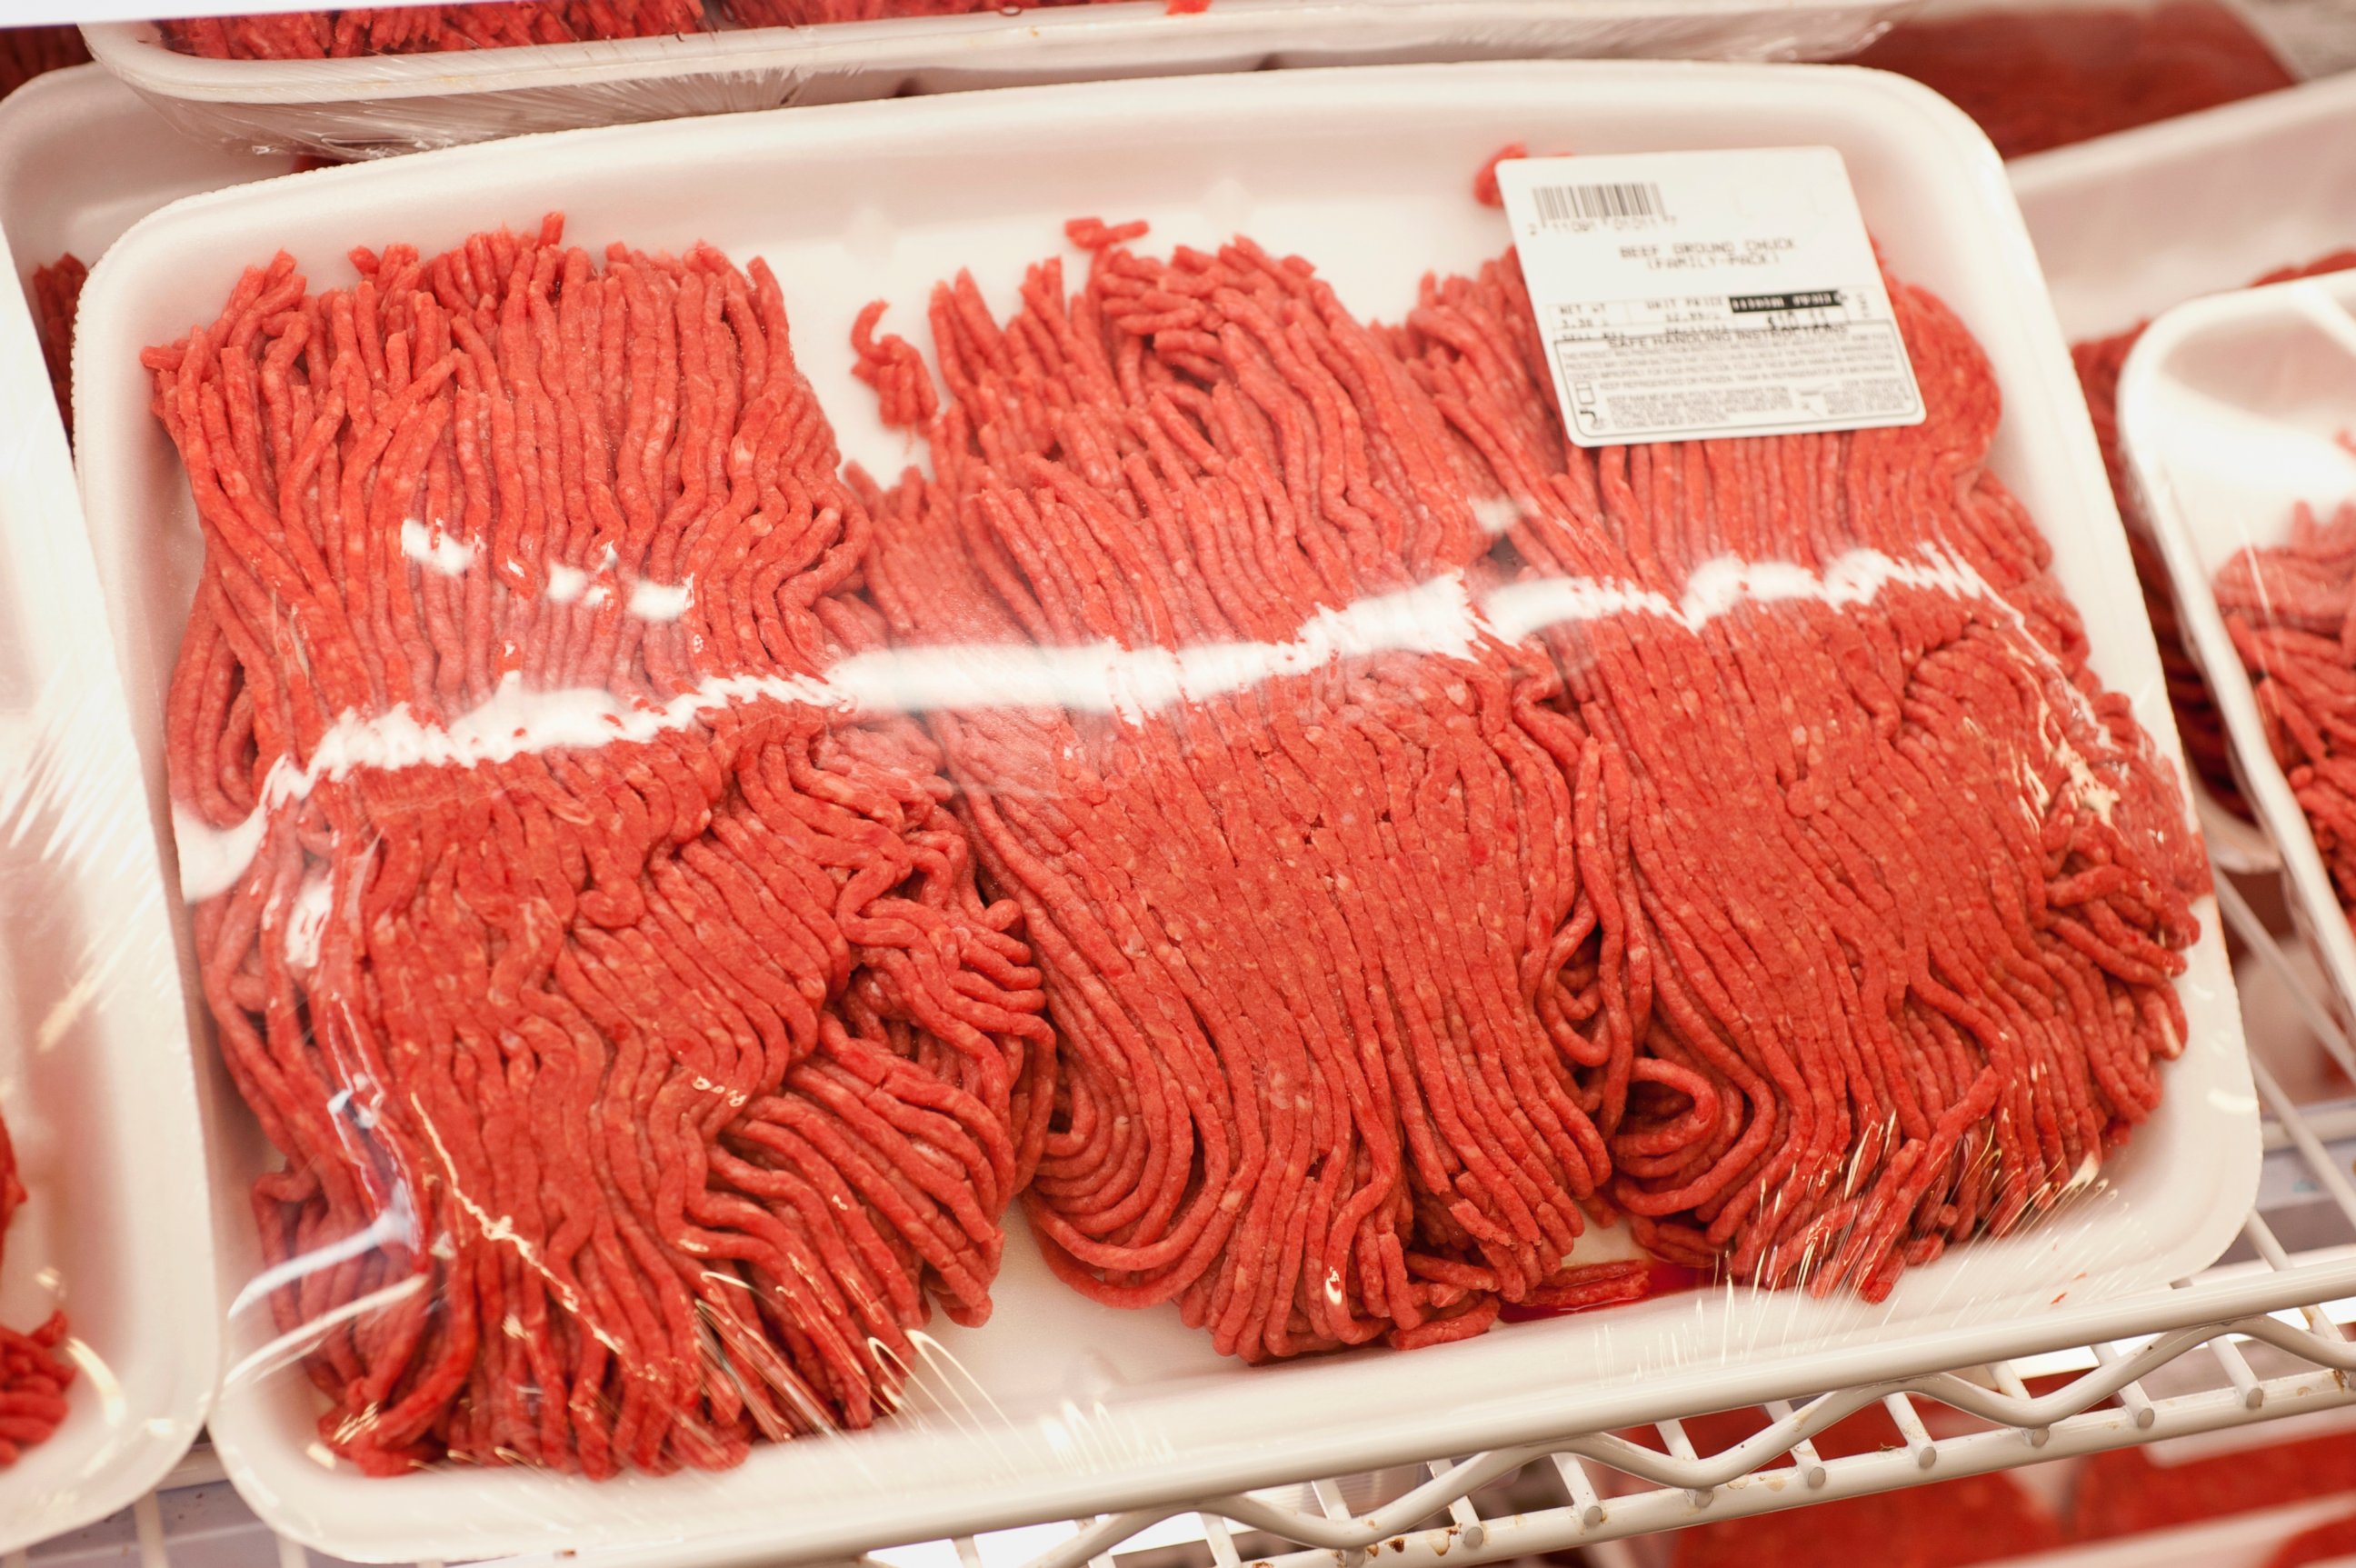 PHOTO: 100 percent ground chuck beef per pound costs about $4.29.